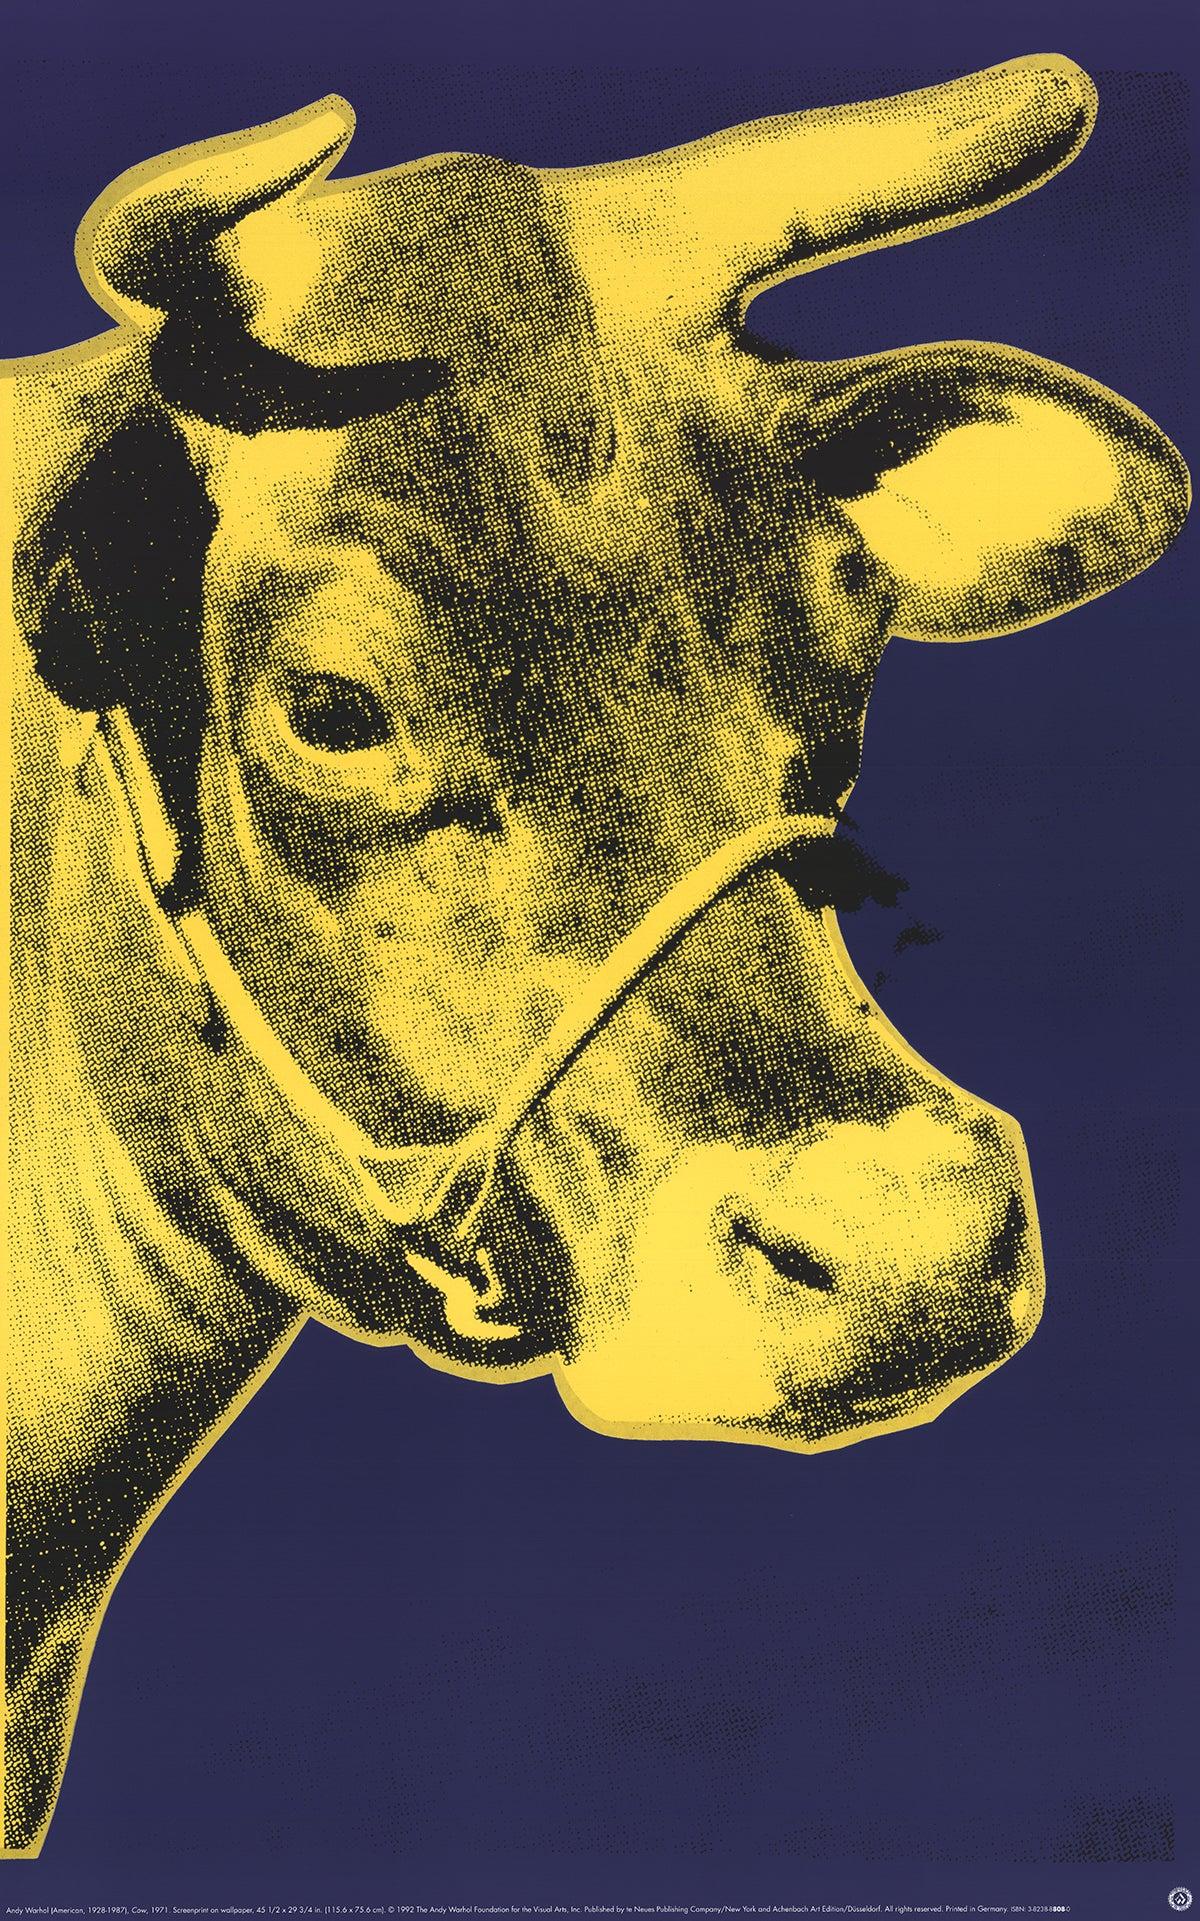 Paper Size: 33.5 x 20.25 inches ( 85.09 x 51.435 cm )
Image Size: 33.5 x 20.25 inches ( 85.09 x 51.435 cm )
Framed: No
Condition: A: Mint

Additional Details: Cow Yellow on Blue by Andy Warhol, printed in 2000, published by Te neues Publishing in